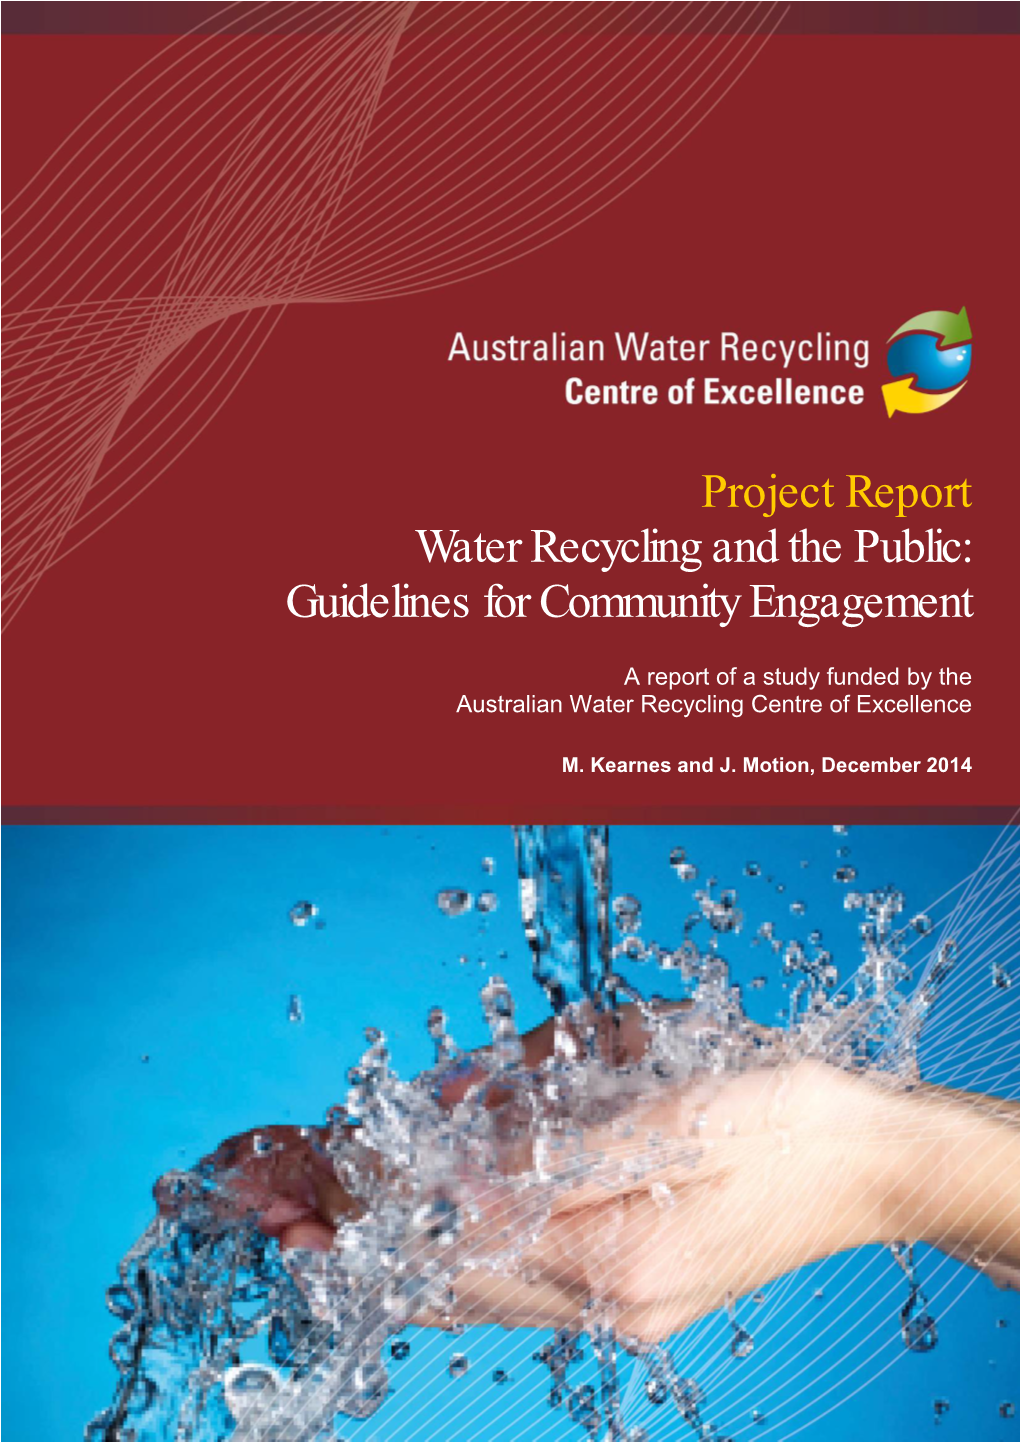 Project Report Water Recycling and the Public: Guidelines for Community Engagement